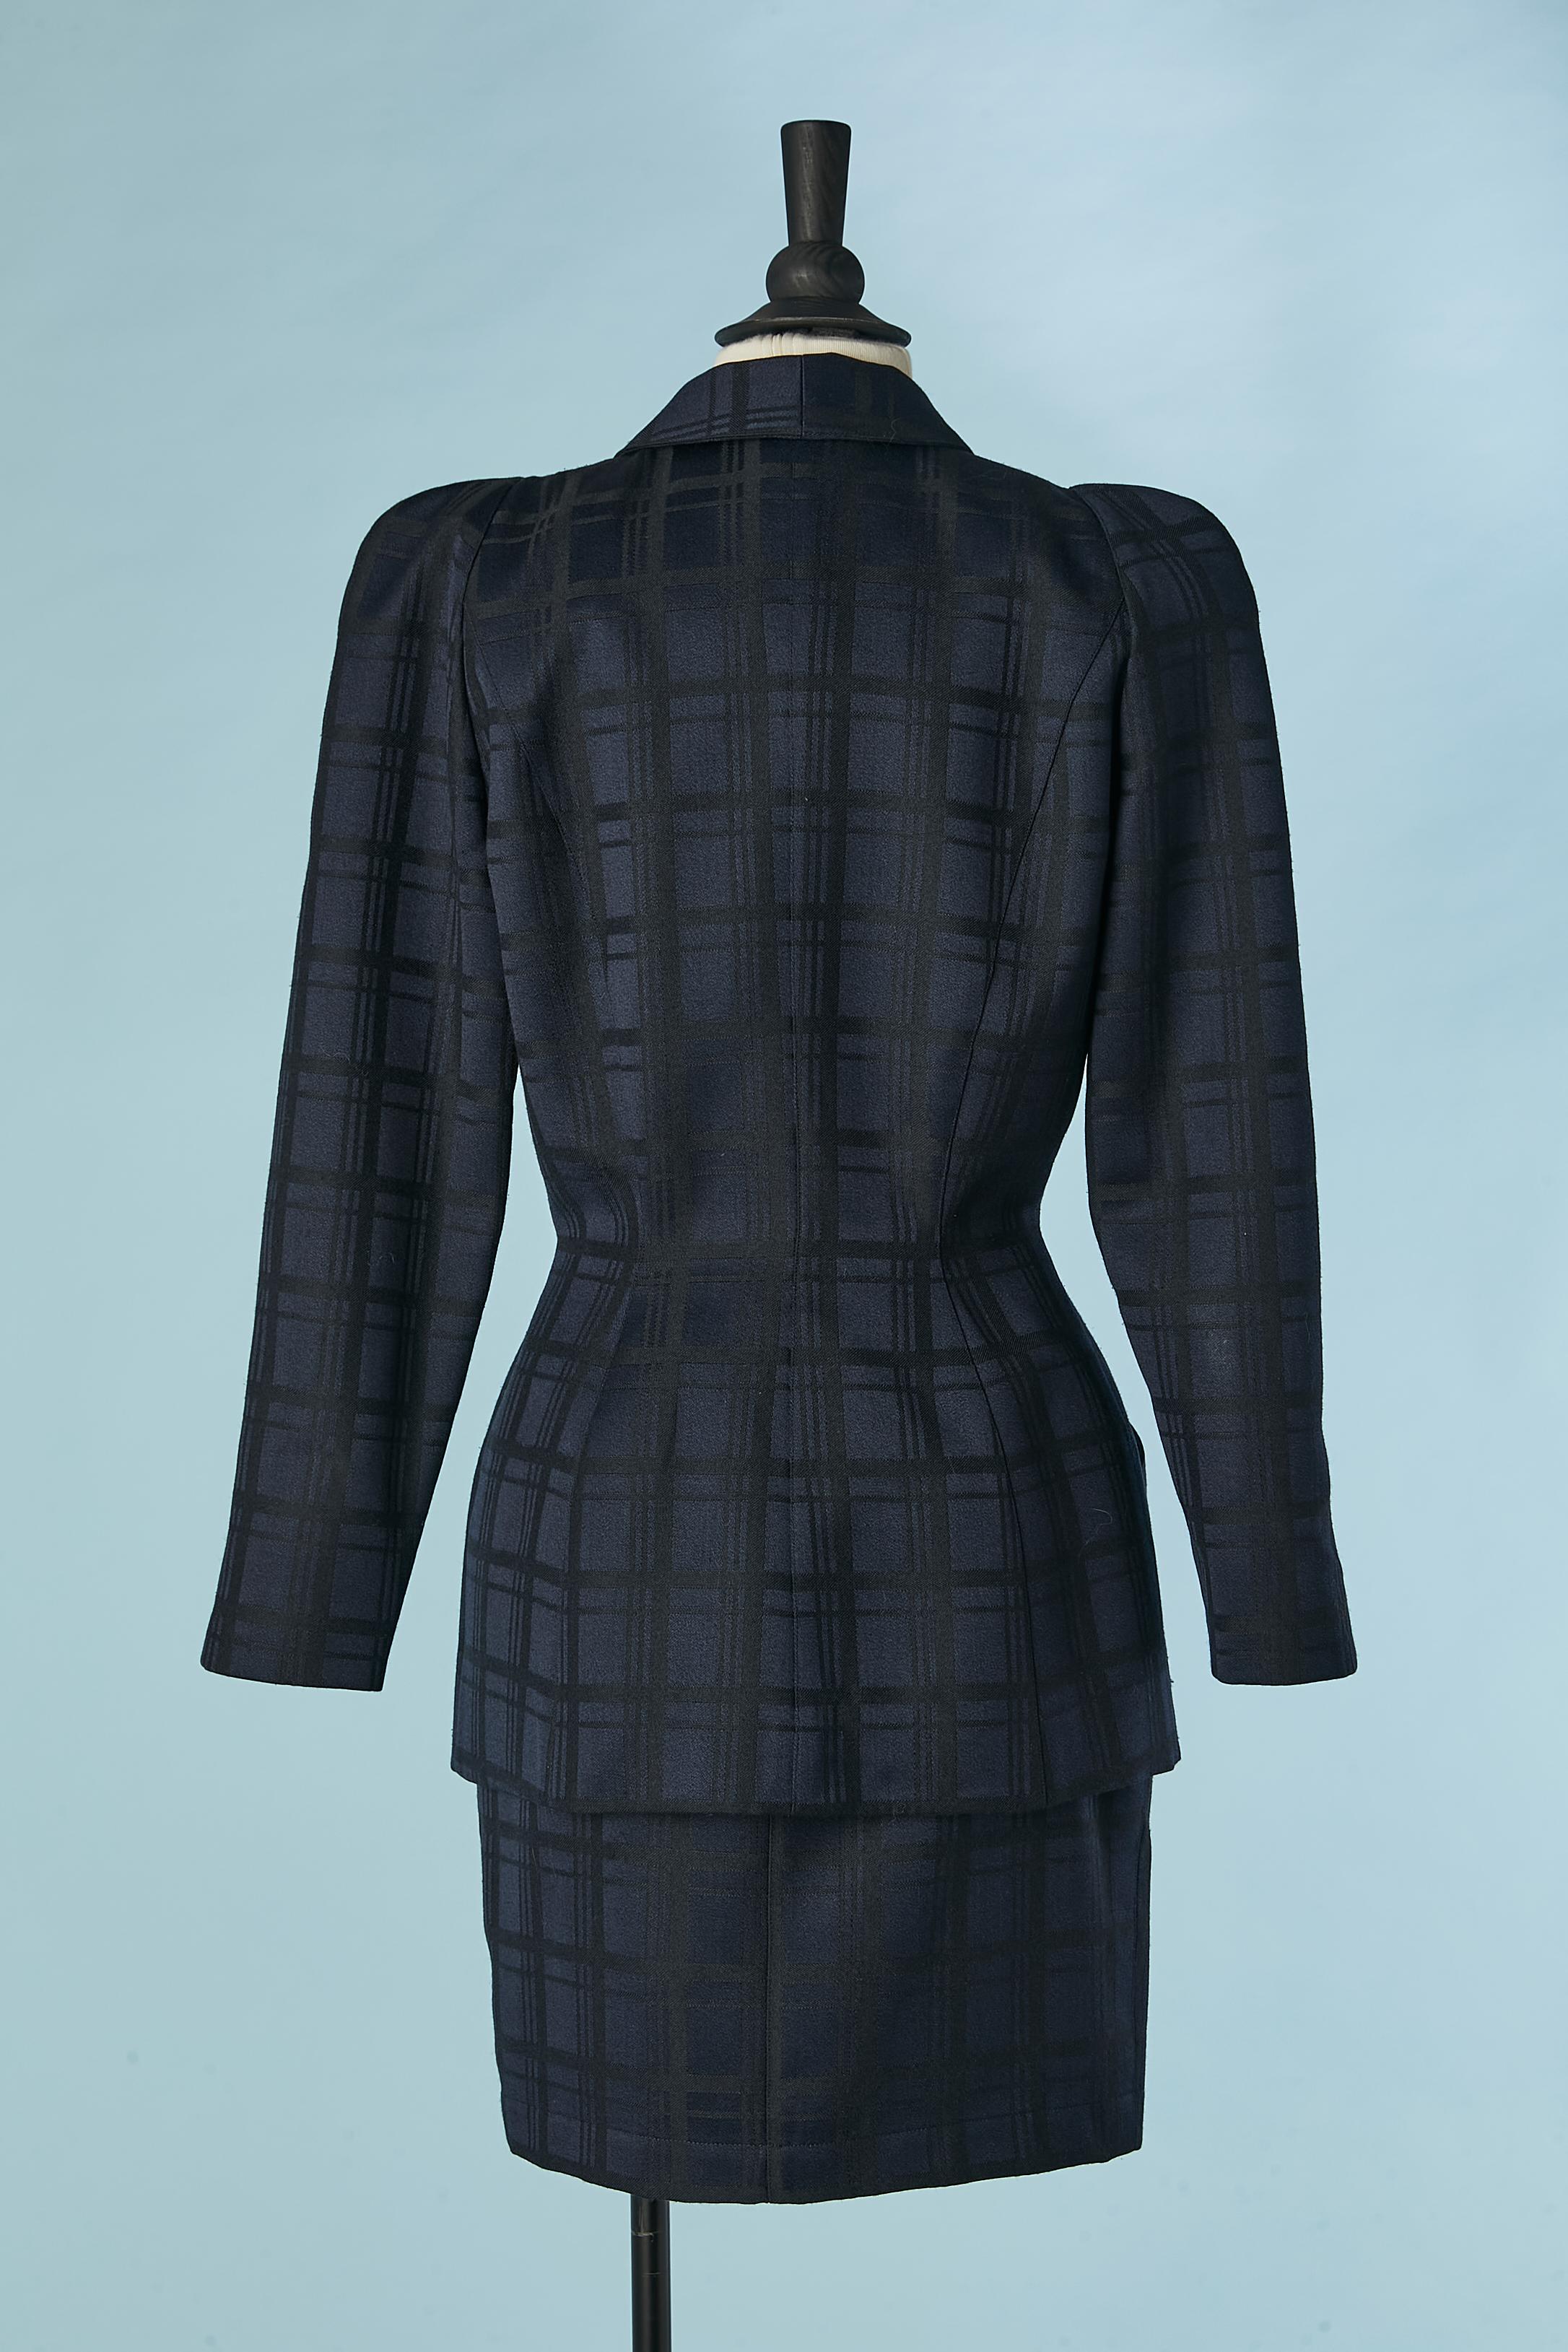 Navy blue and black check pattern jacquard skirt-suit Thierry Mugler Circa 1990 For Sale 2